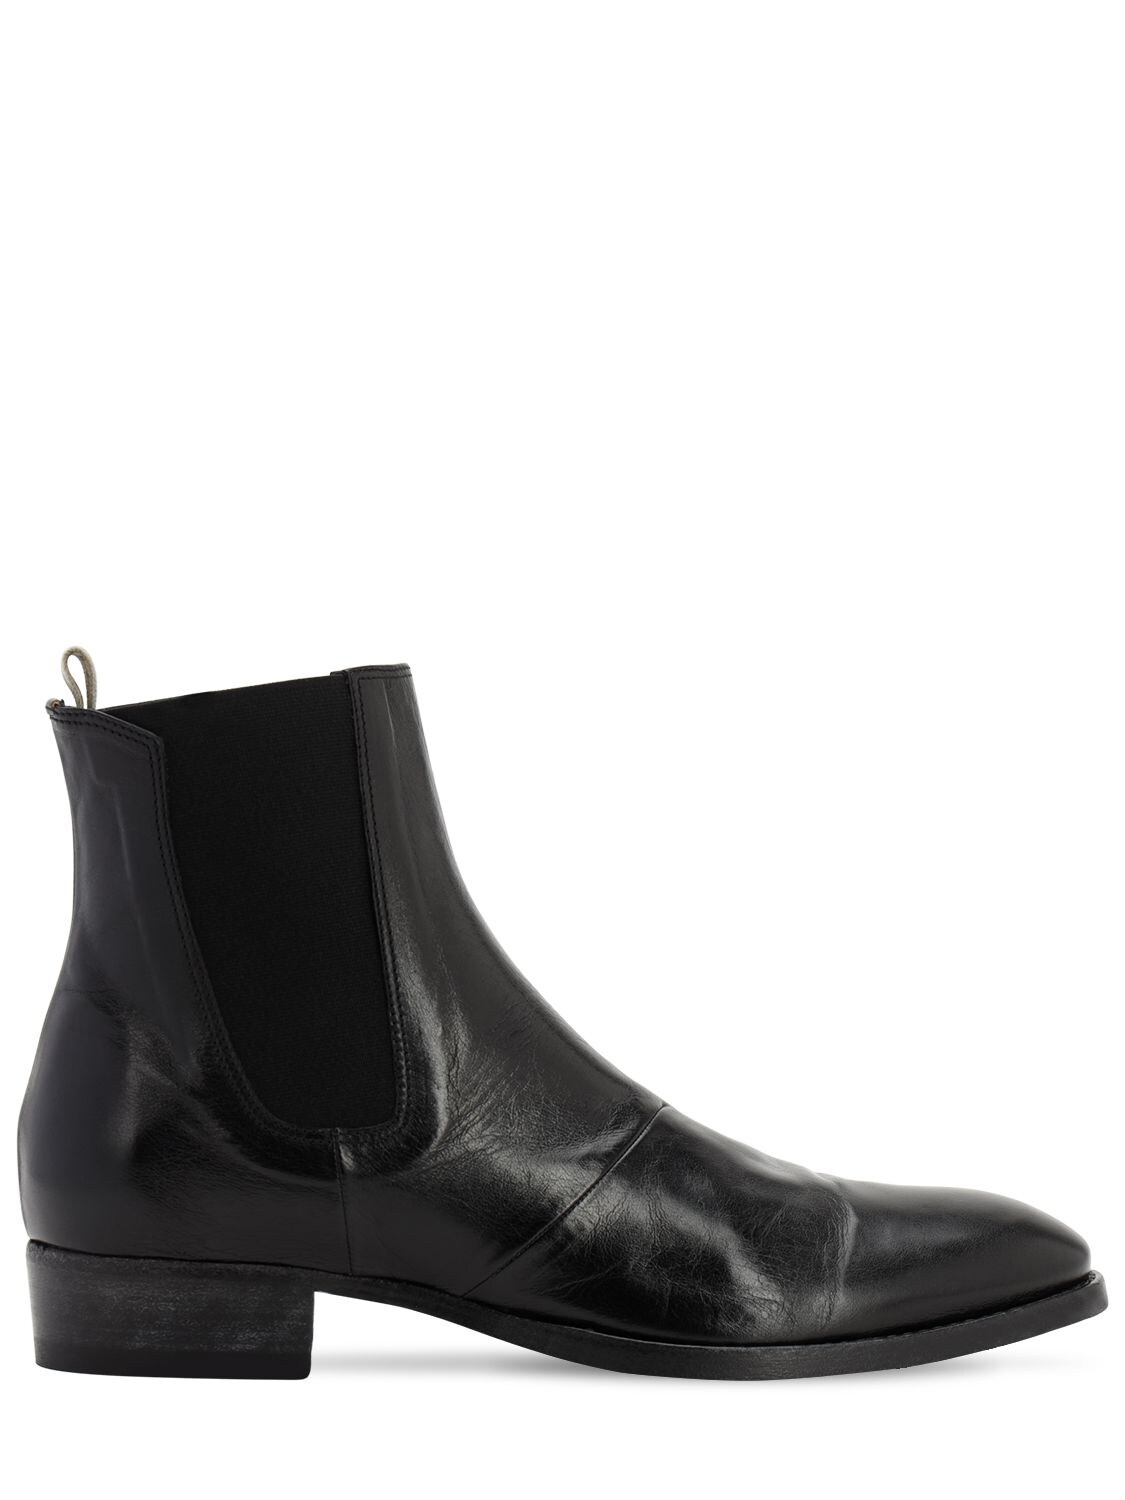 OFFICINE CREATIVE LEATHER CHELSEA BOOTS,71ID1K006-MTAWMA2